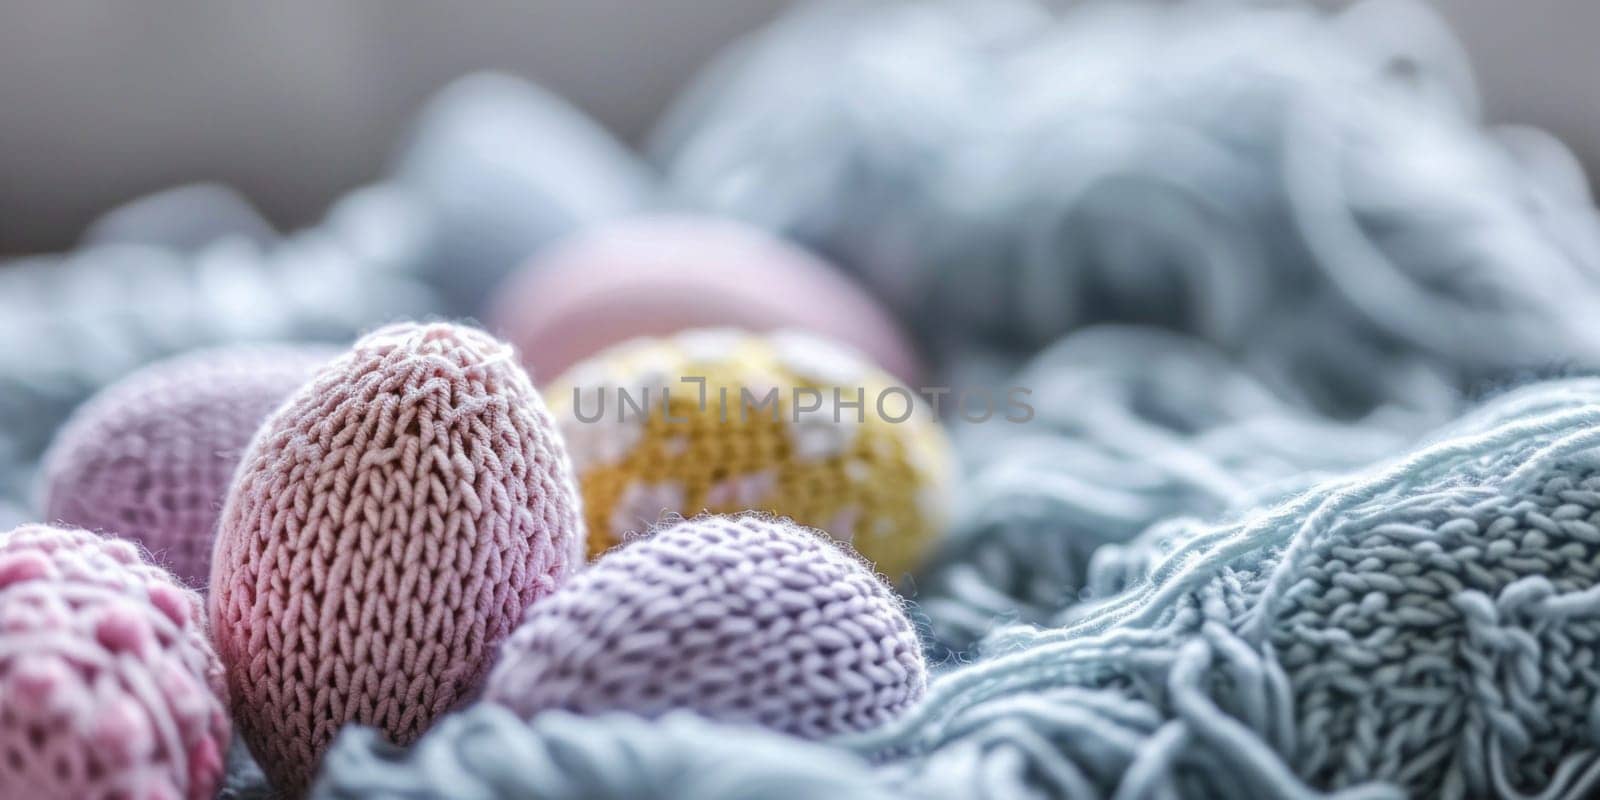 A close up of a bunch of knitted eggs on top of yarn